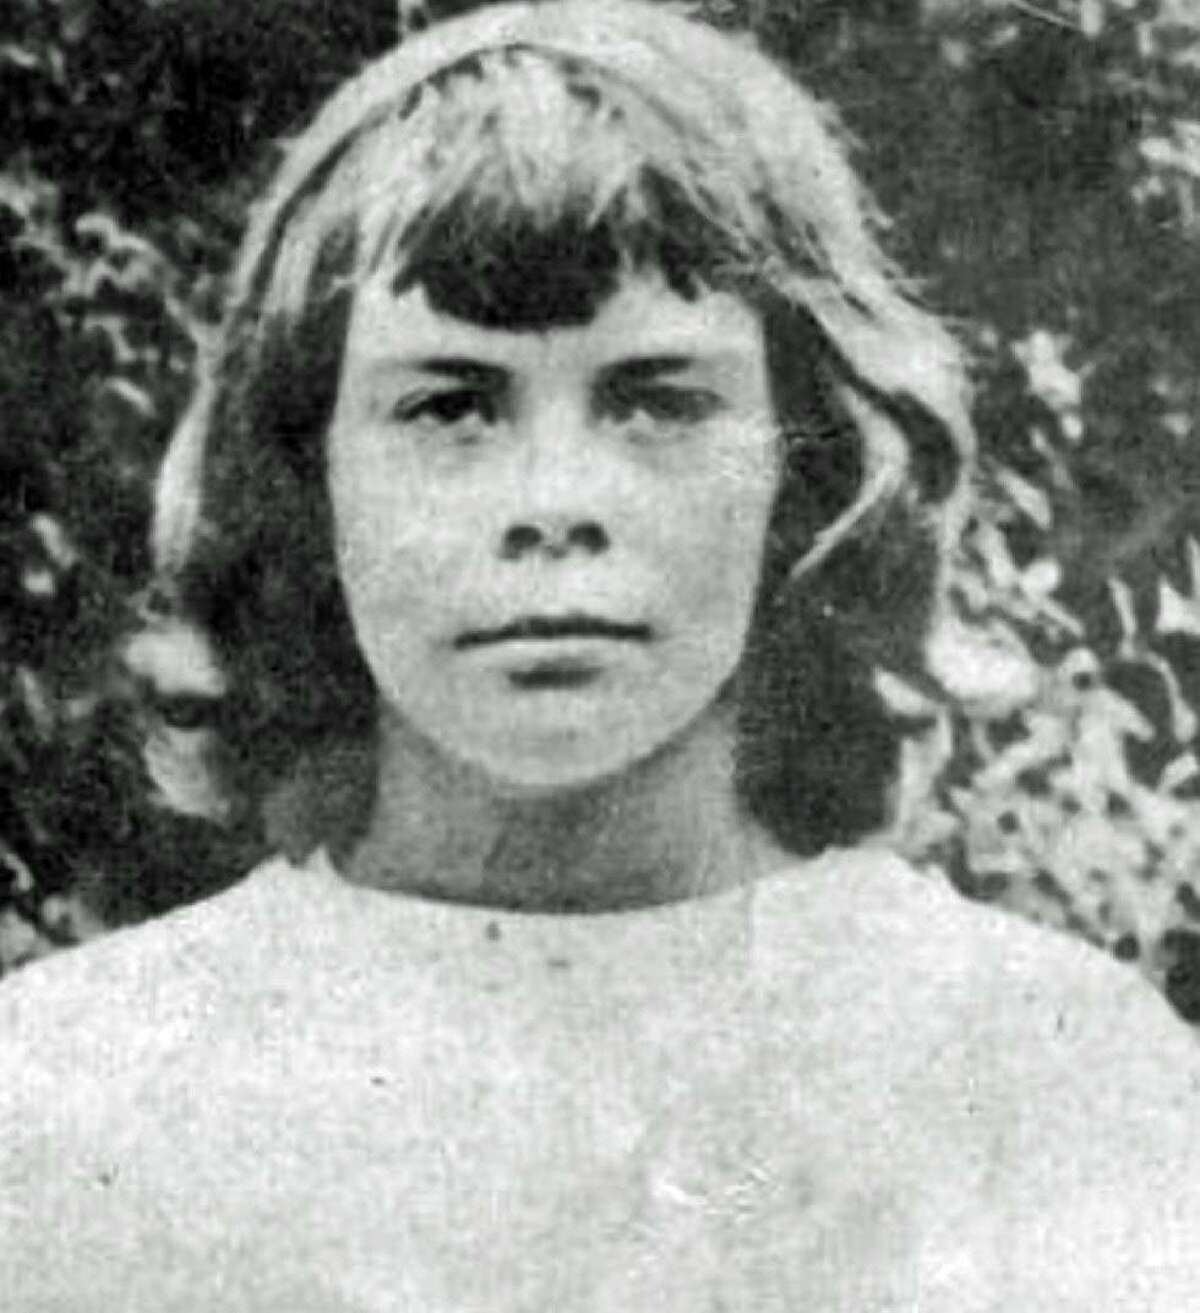 A detail of a photo was shown of 10-year-old Connie Smith, who disappeared July 16, 1952, and was not seen since. Smith had been a summer camper at Camp Sloane at 124 Indian Mountain Road in Lakeville. A former Wyoming Governor’s granddaughter, Smith was last seen at the intersection of Route 44 and Belgo Road after she had decided to walk to Lakeville from the camp. Smith’s disappearance prompted a national search and the largest manhunt in Connecticut history.